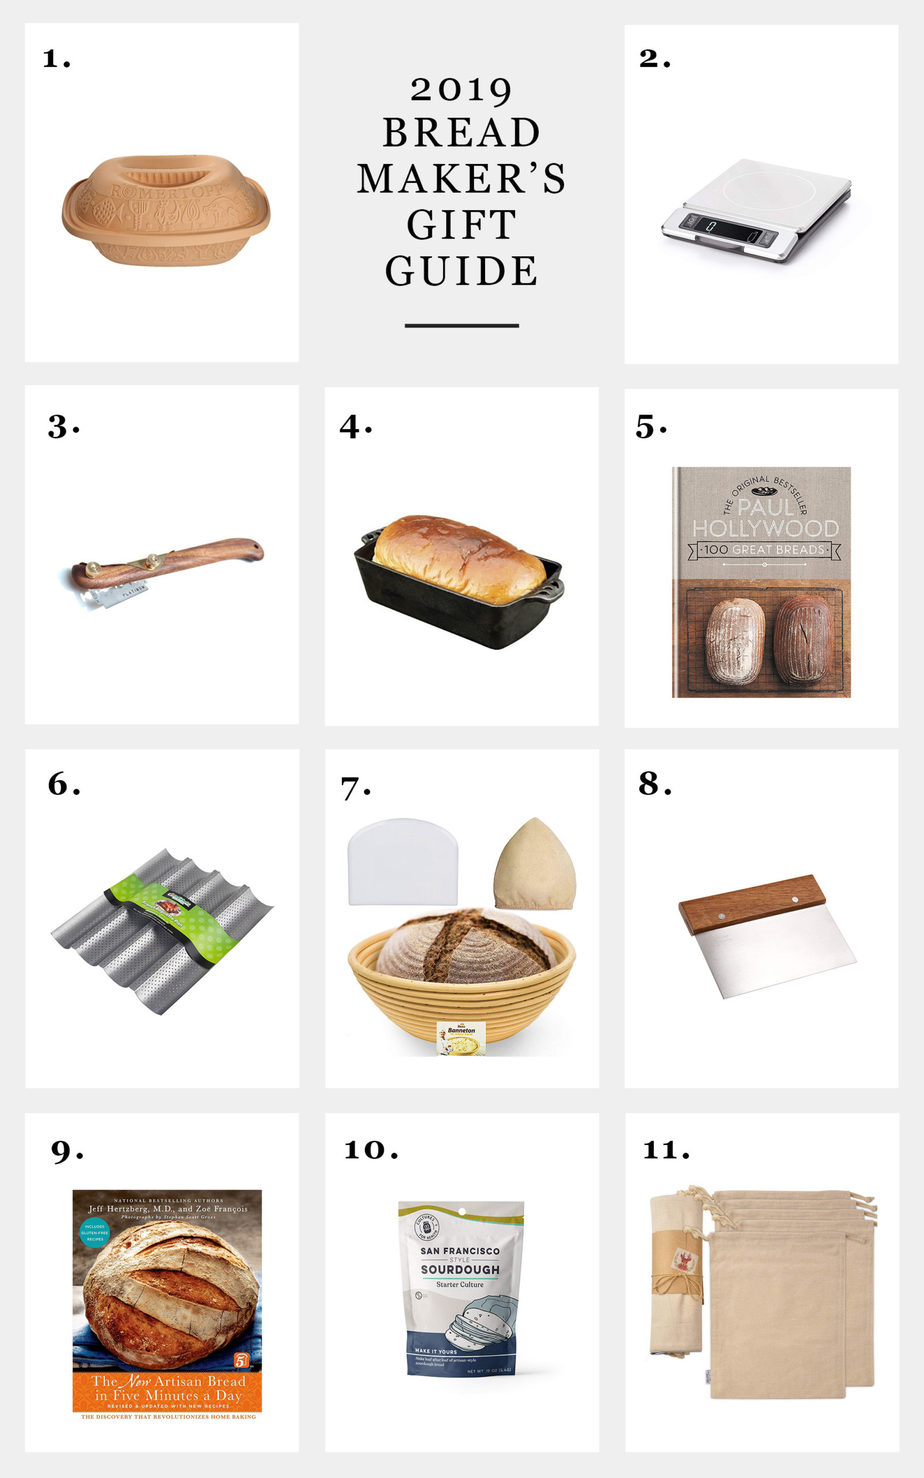 Bread Maker's Gift Guide product collage and text overlay